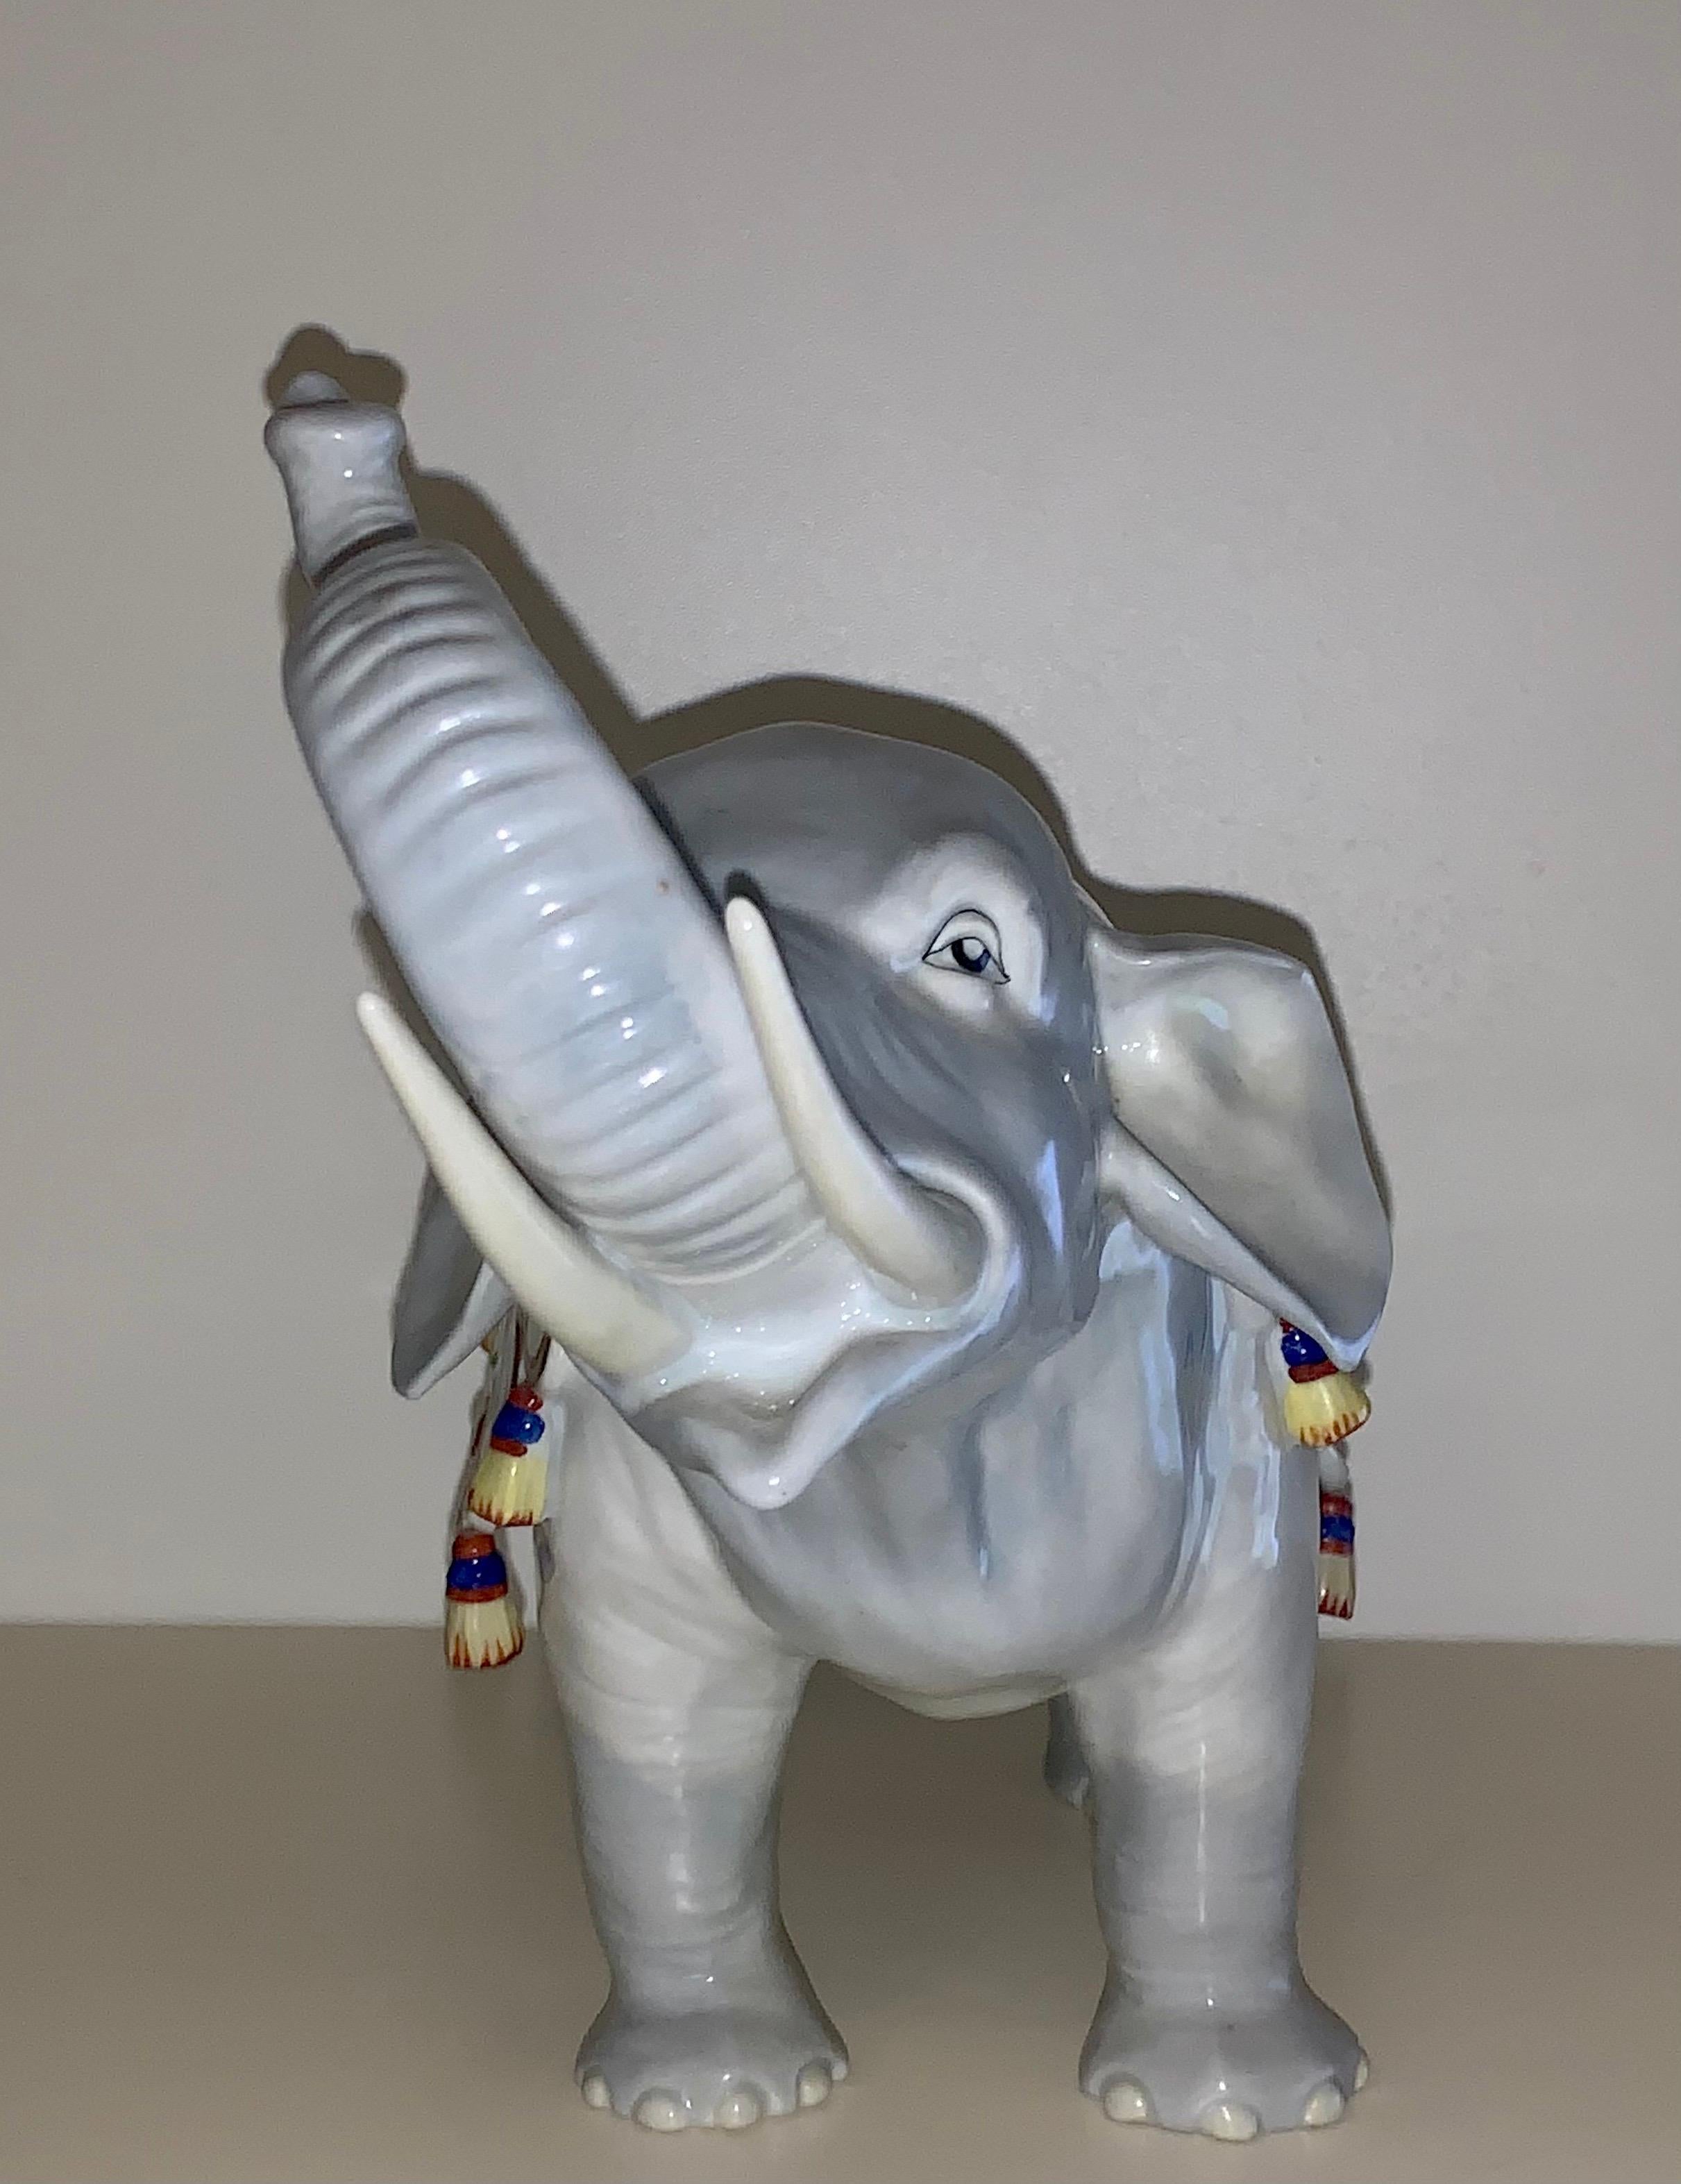 The elephant is shown with its trunk raised and is draped with an embroidered and tasselled blanket. Hand painted and modeled with fine detail. Carl Thieme founded his porcelain factory in Potschappel, Germany in 1872. Once a decorator and porcelain